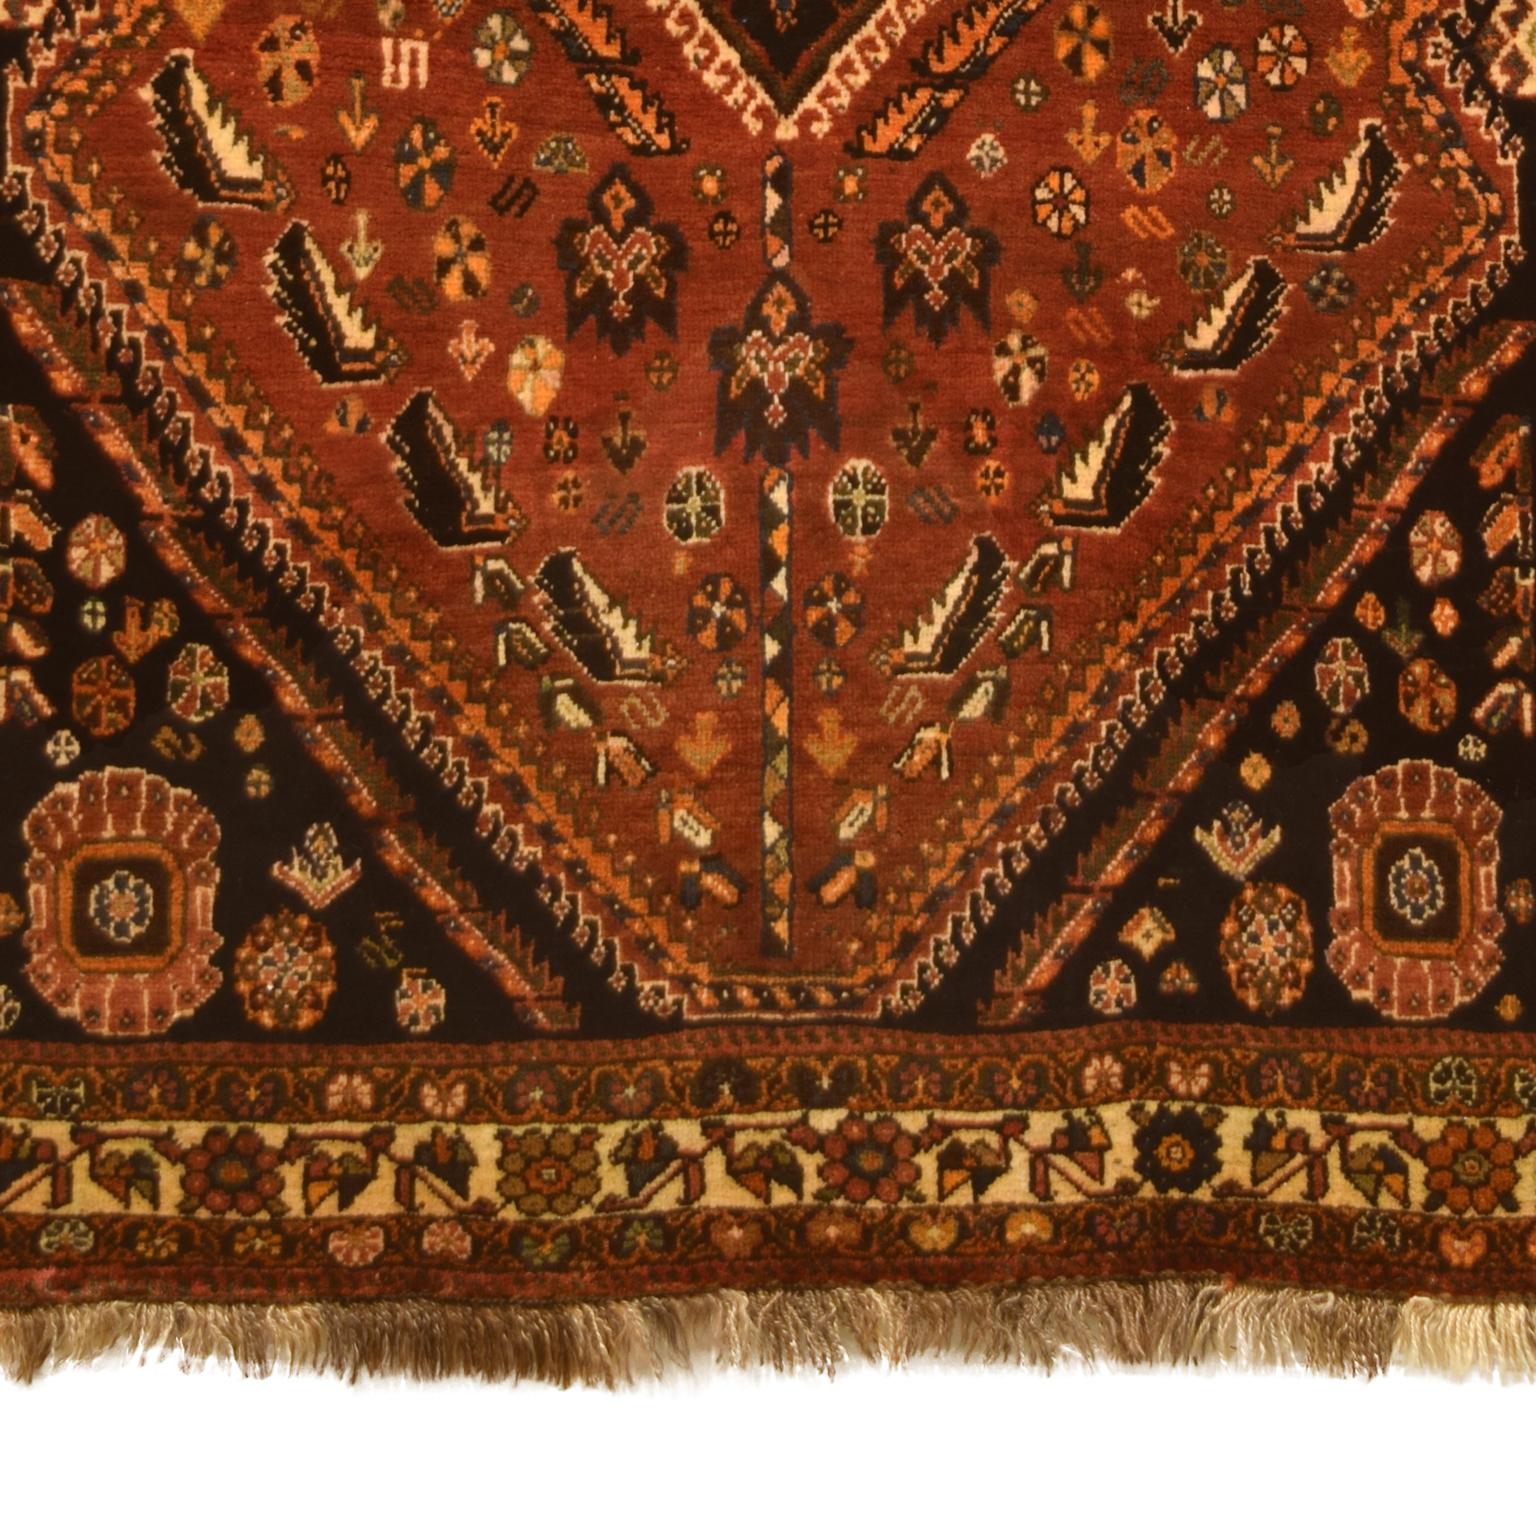 This semi-antique Persian Qashqai carpet is hand knotted in red, orange, brown, and cream wool. Crafted over 50 years ago, this classic Persian carpet remains in perfect condition. The traditional Persian weaving technique provides a plush pile and